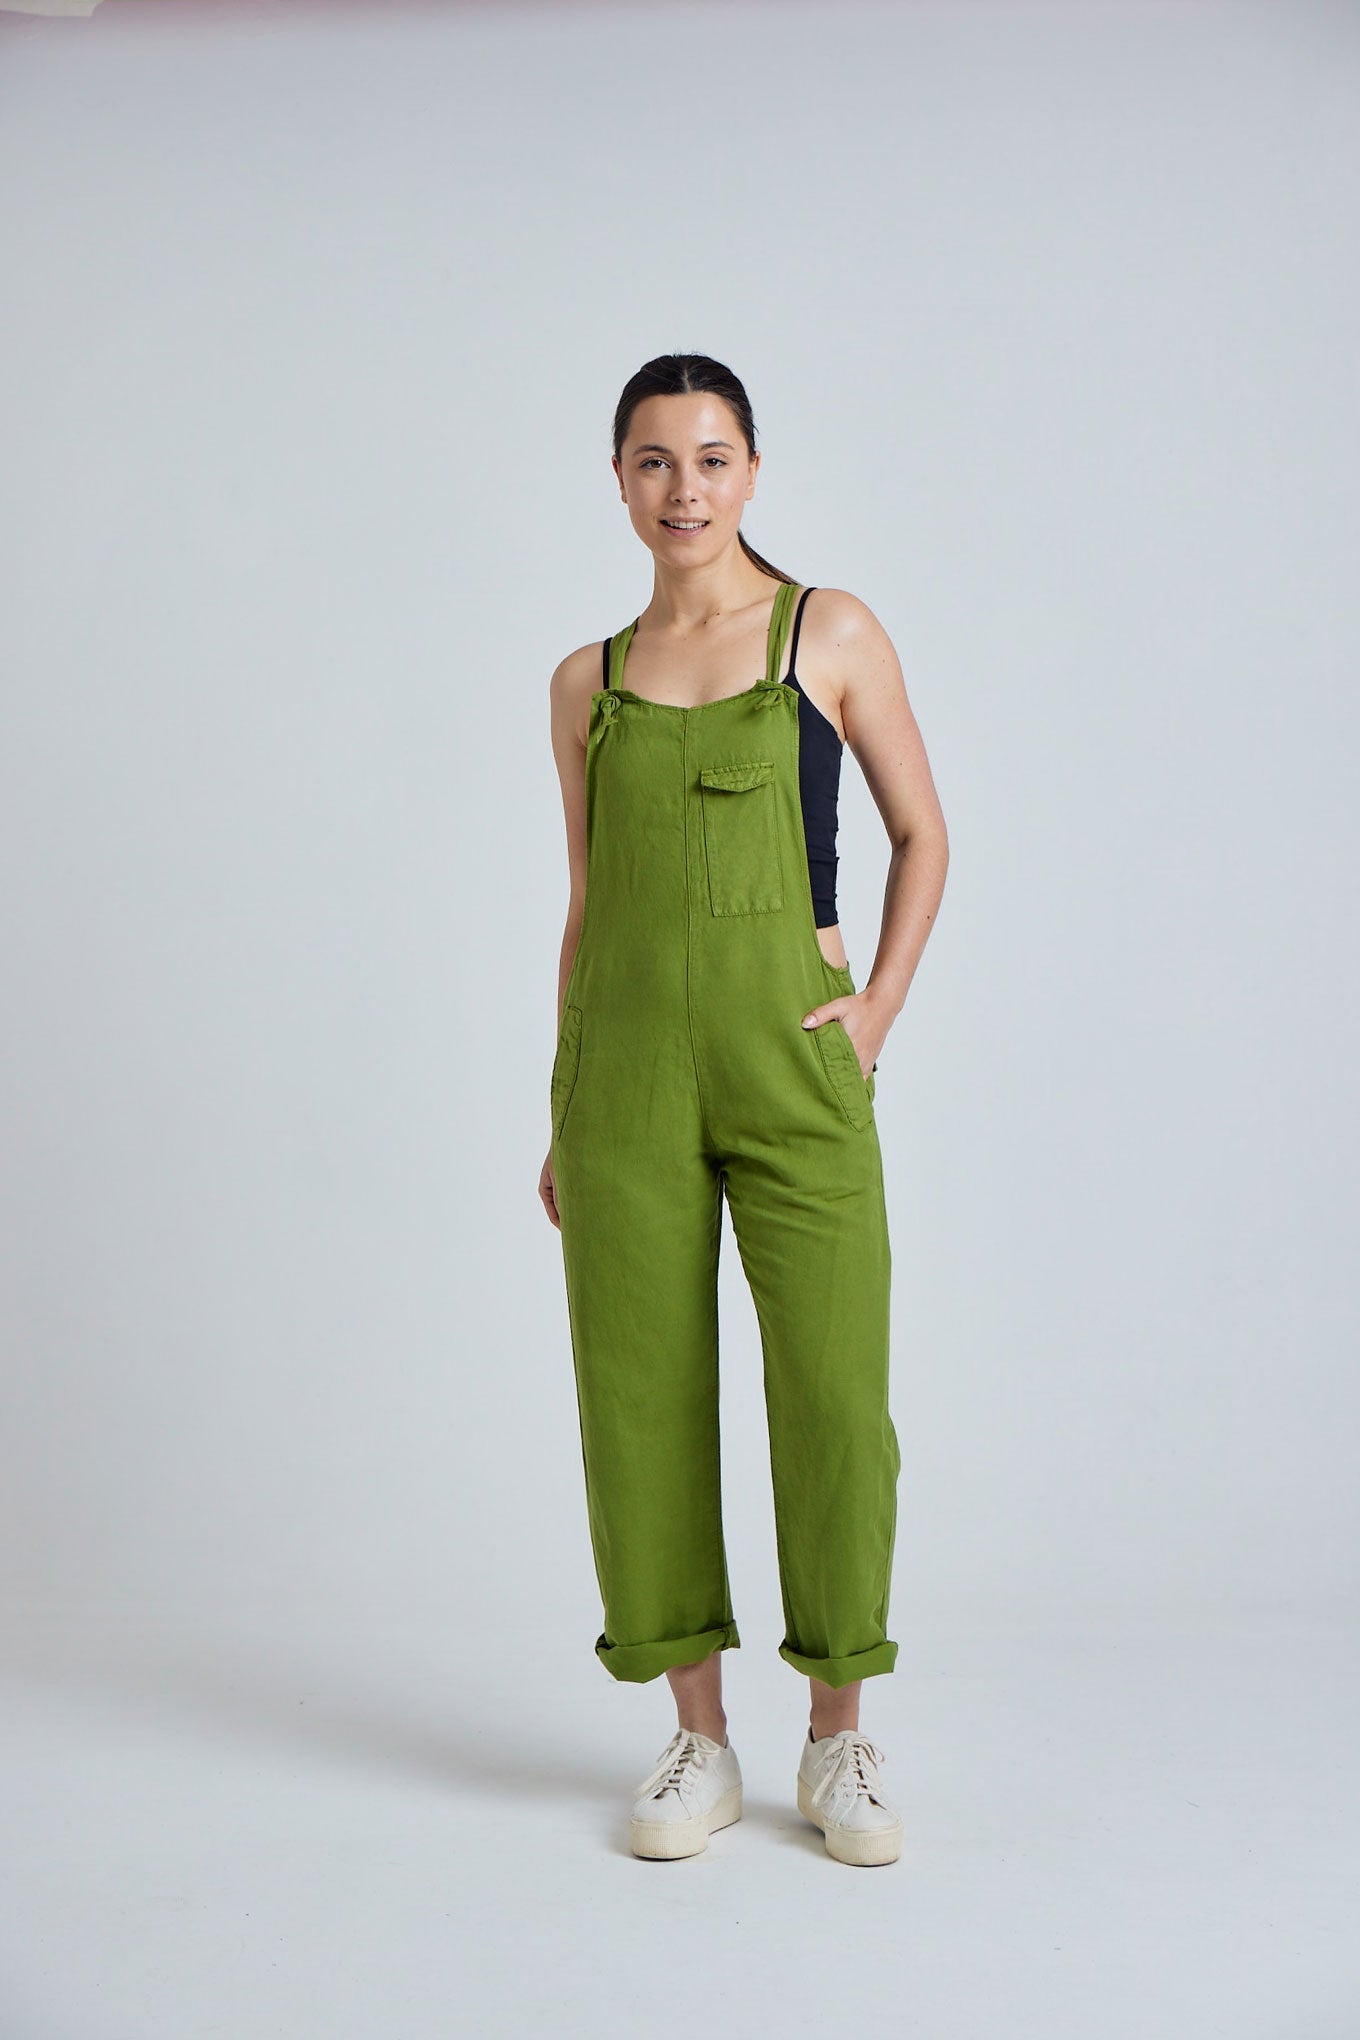 MARY-LOU Green - GOTS Organic Cotton Dungaress by Flax & Loom, SIZE 5 / UK 16 / EUR 44